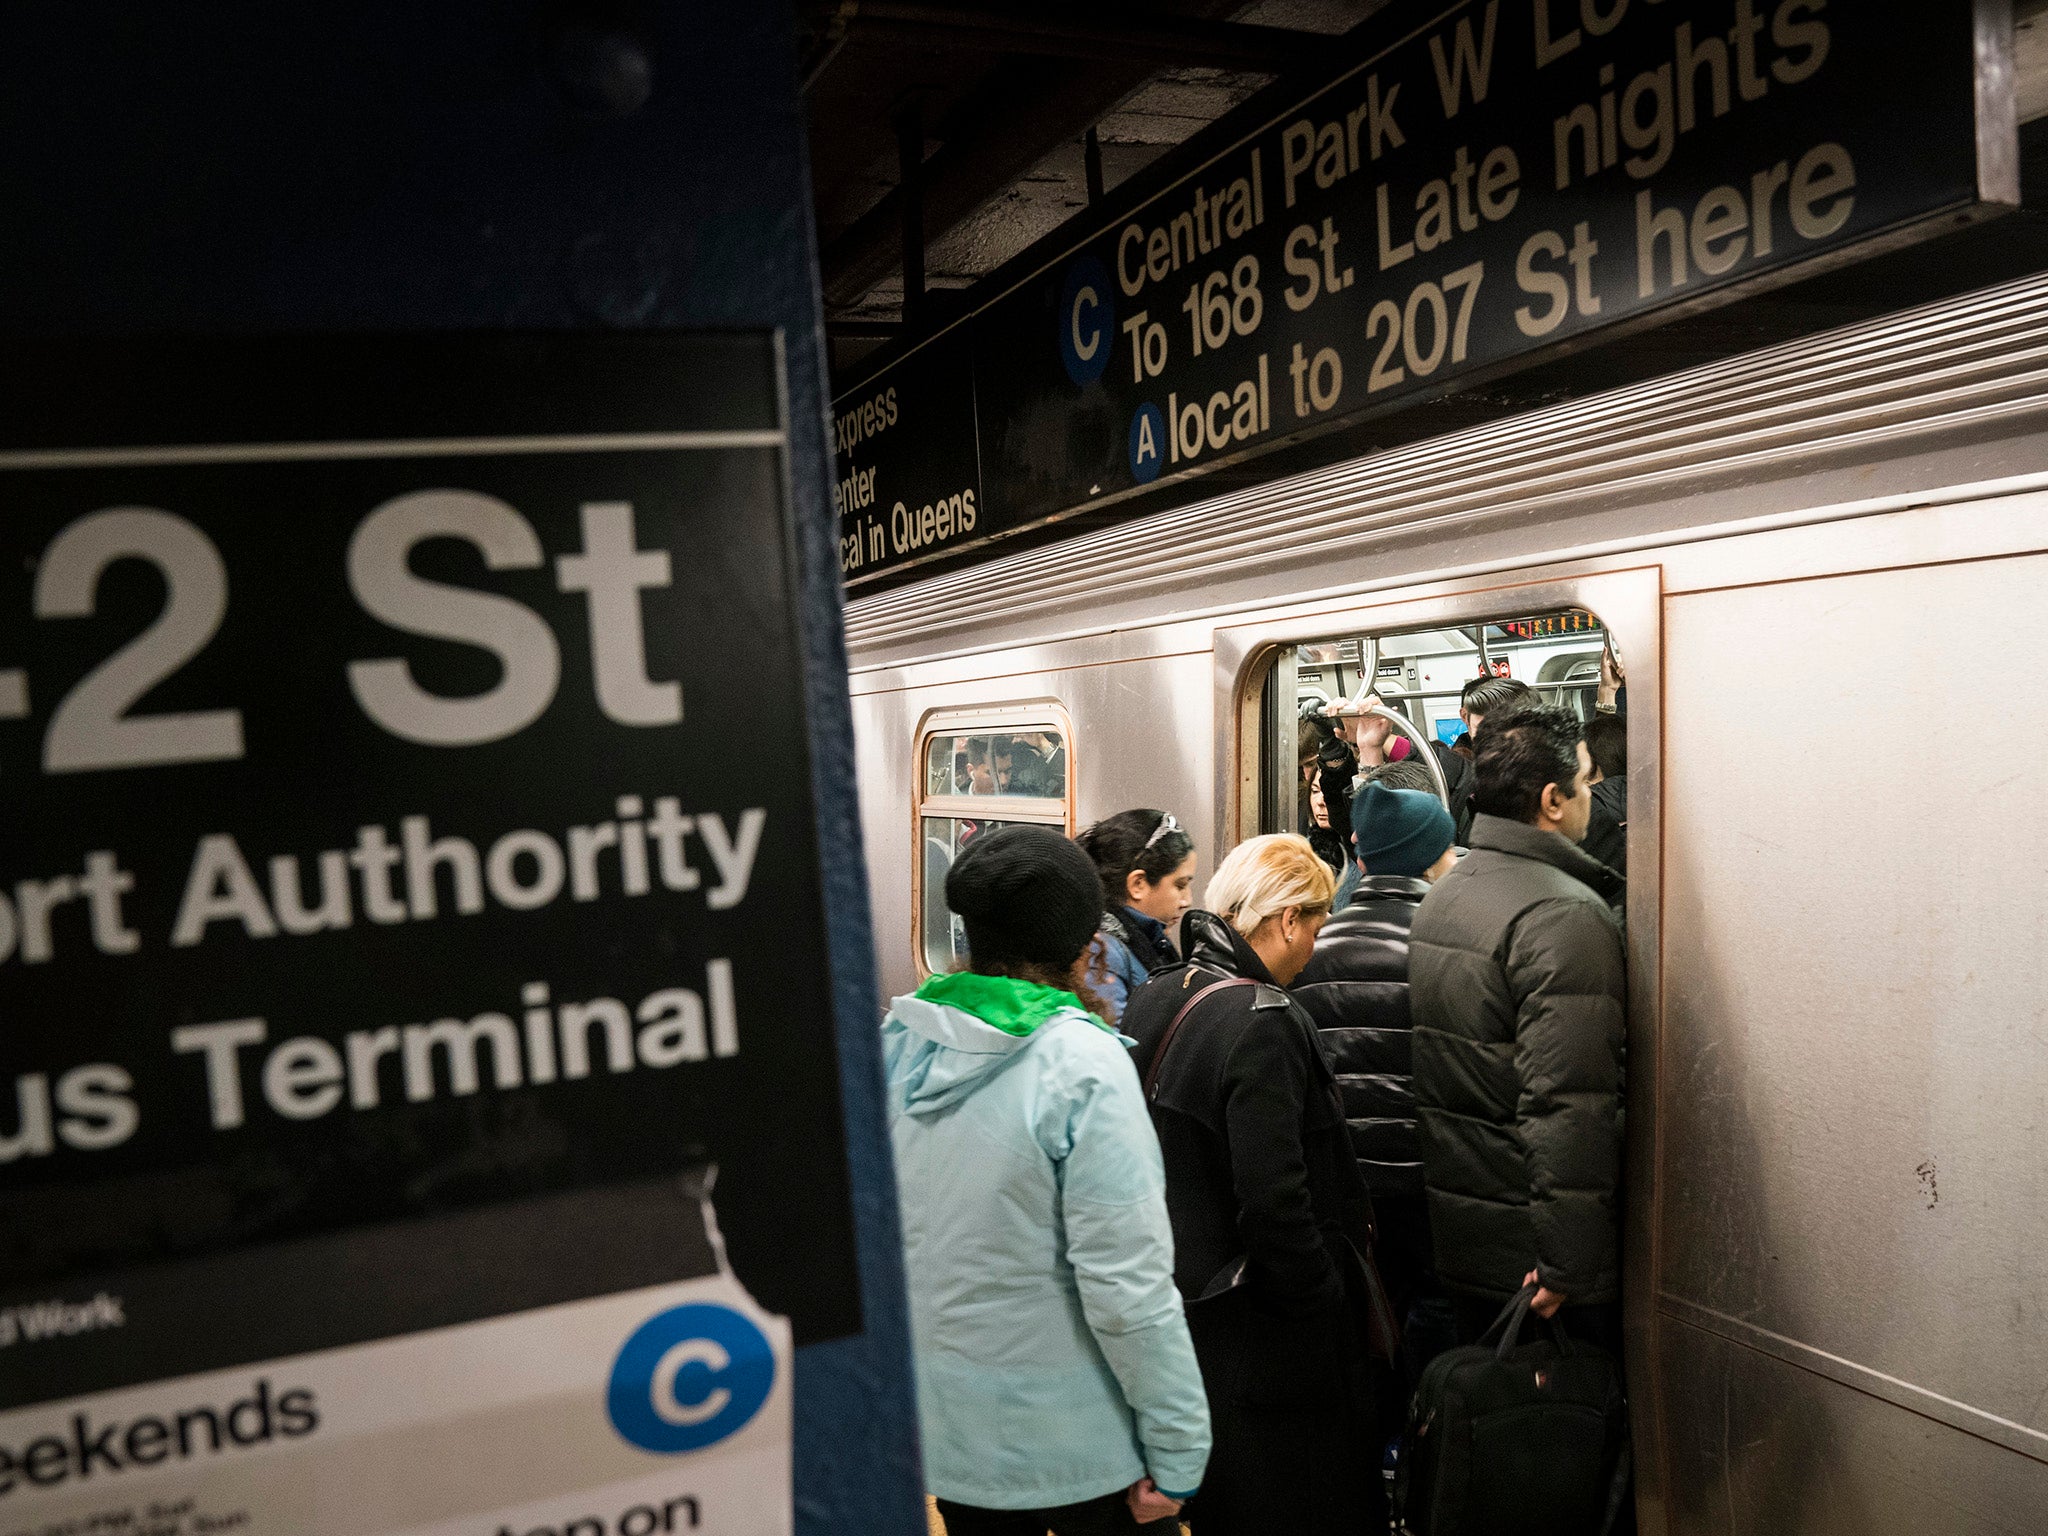 A man caught fire after falling on to tracks at 42nd St station